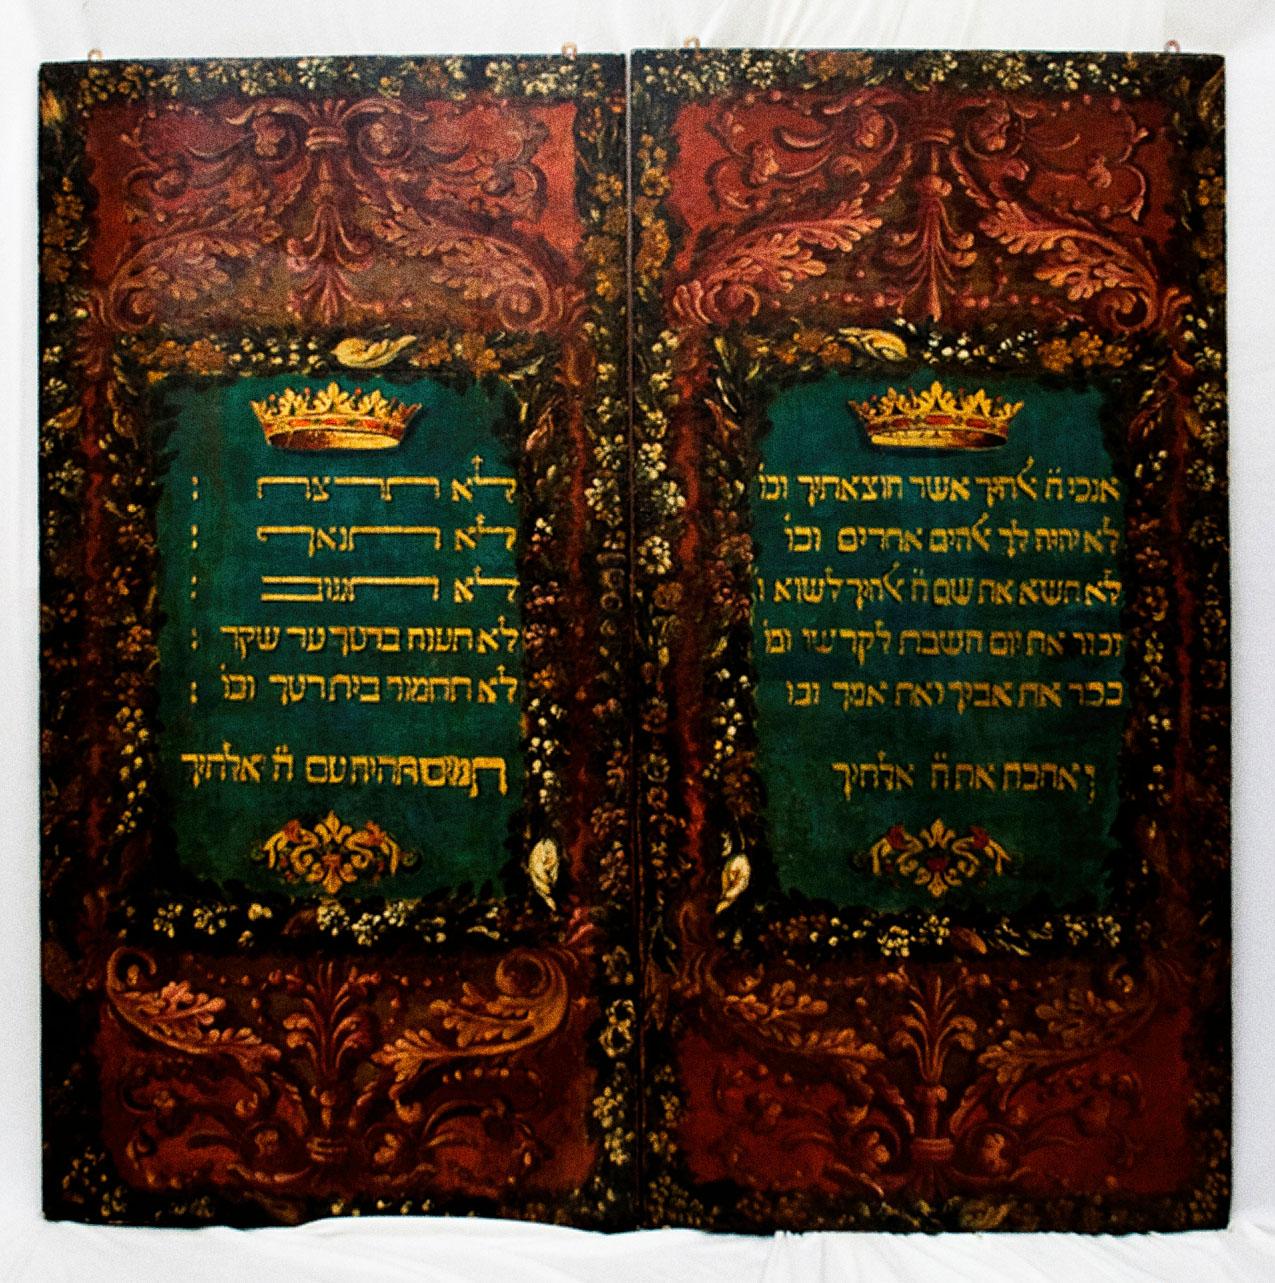 Carved double doors with Hebrew writing on left and right, with crowns above and floral decoration below, surrounded by carved decorative motifs. 